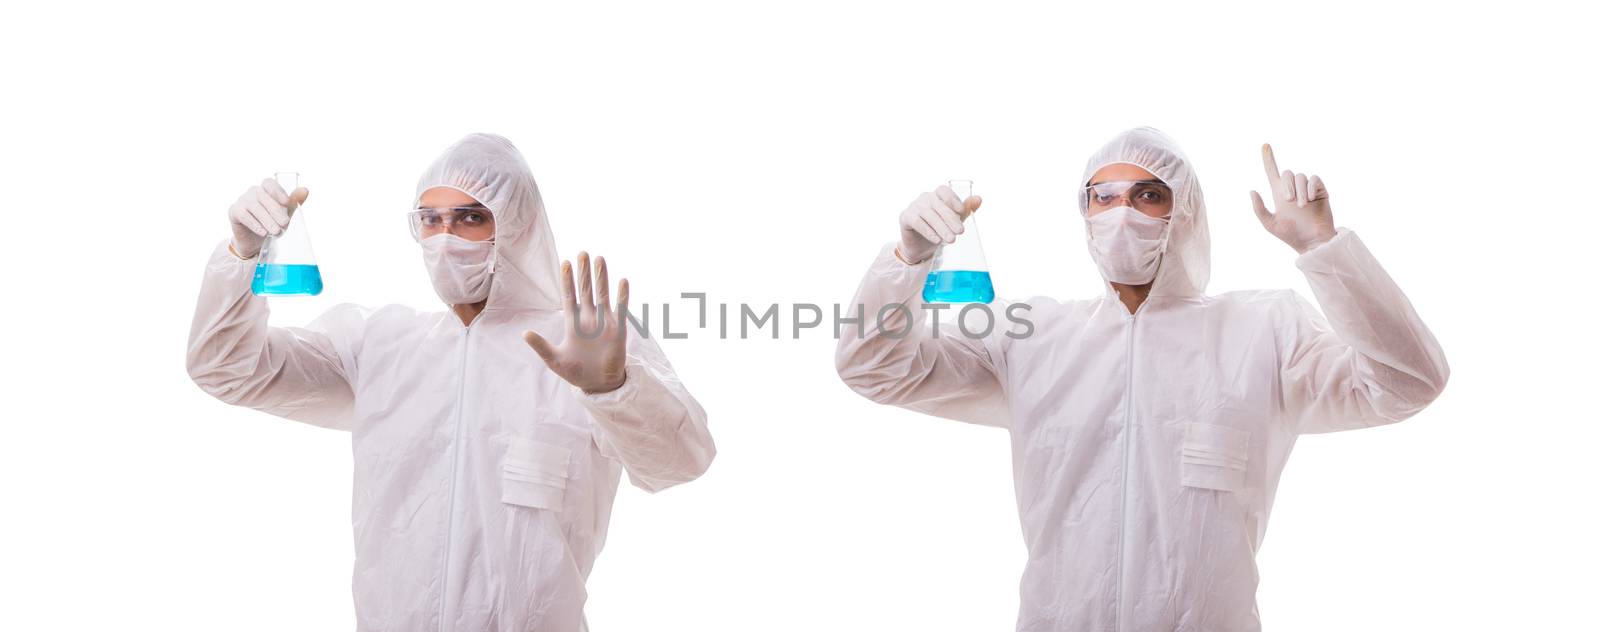 Chemist working with radioactive substances isolated on white ba by Elnur